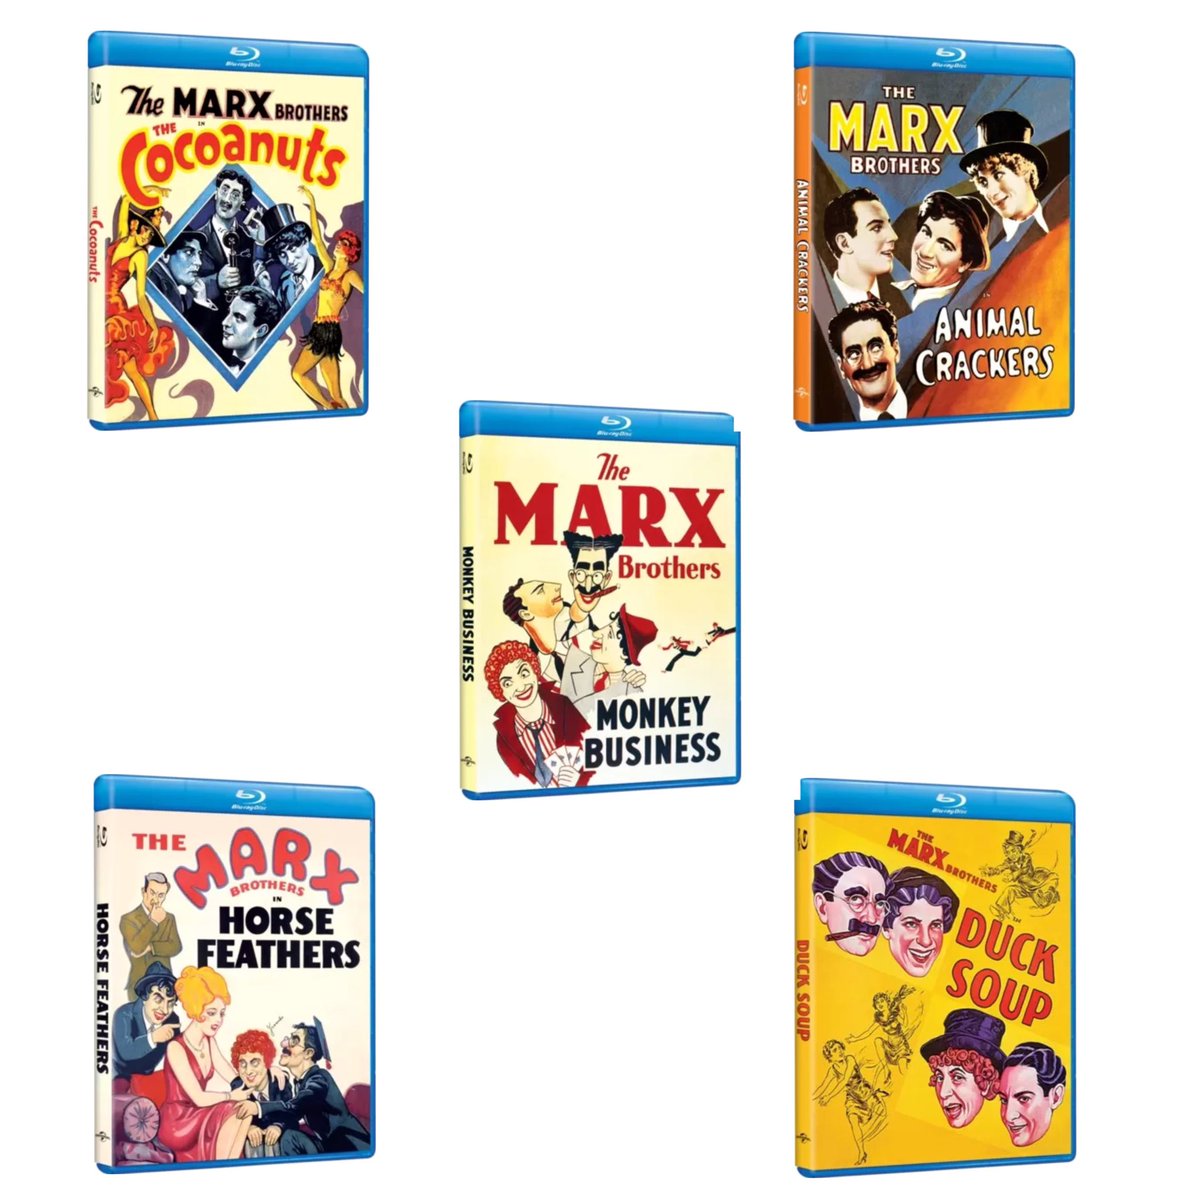 Coming back to #Bluray via Universal with individuals on November 7, 2023 

The Marx Brothers Silver Screen Collection (1929-1933)

#FilmTwitter #Cinema #TheMarxBrothers